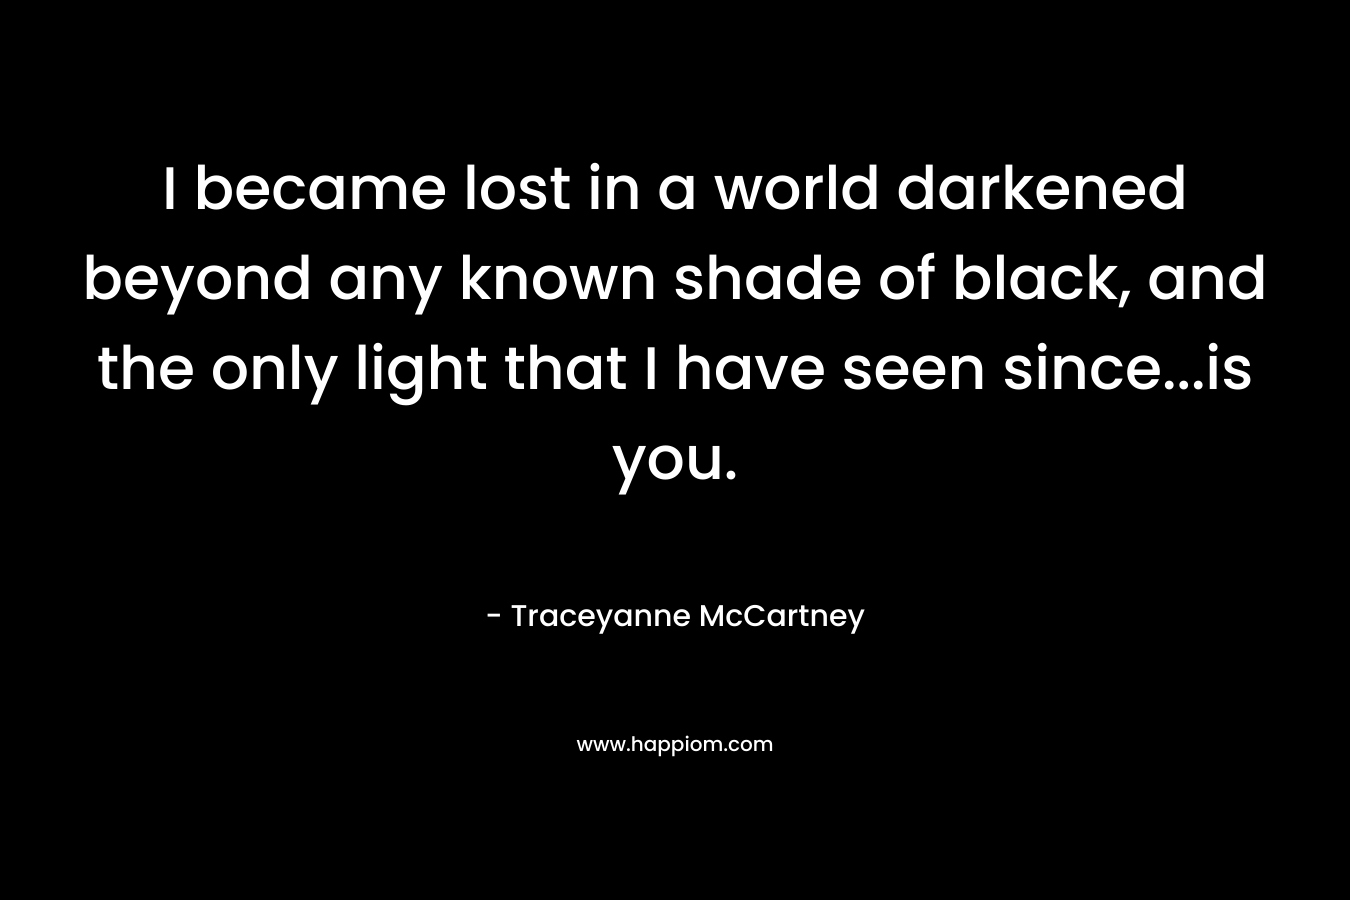 I became lost in a world darkened beyond any known shade of black, and the only light that I have seen since...is you.